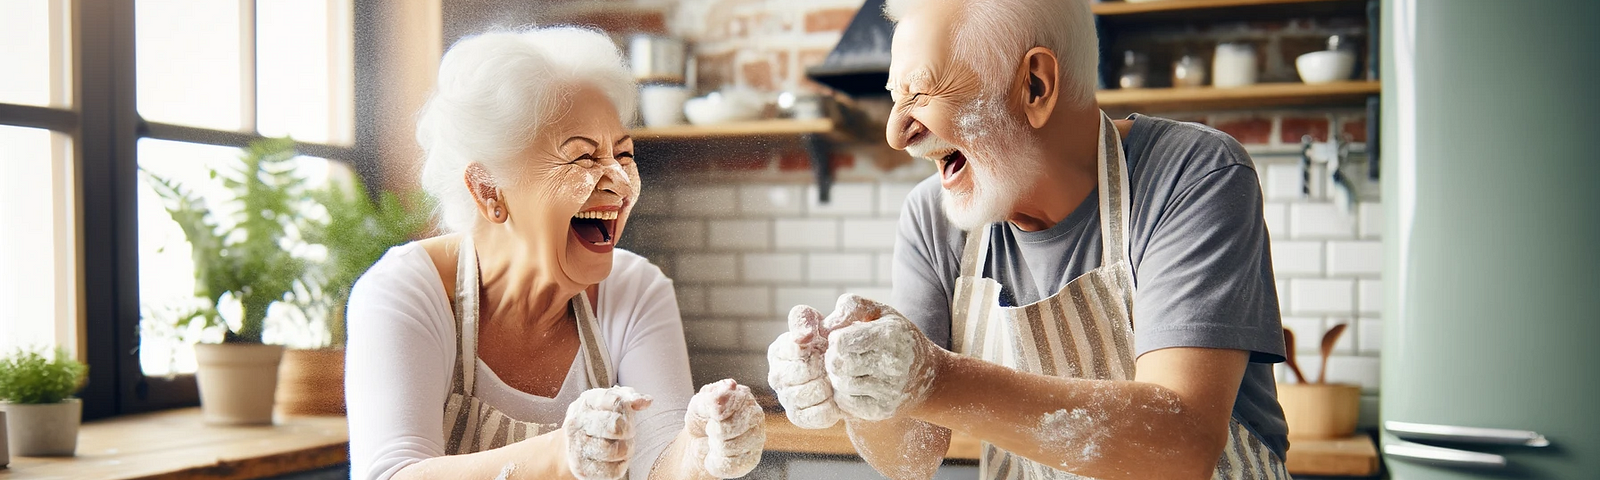 Elderly couple laughing together while covered in flour as they bake in a homely kitchen, surrounded by baking ingredients and utensils, embodying the joy of active living and healthy eating at any age.